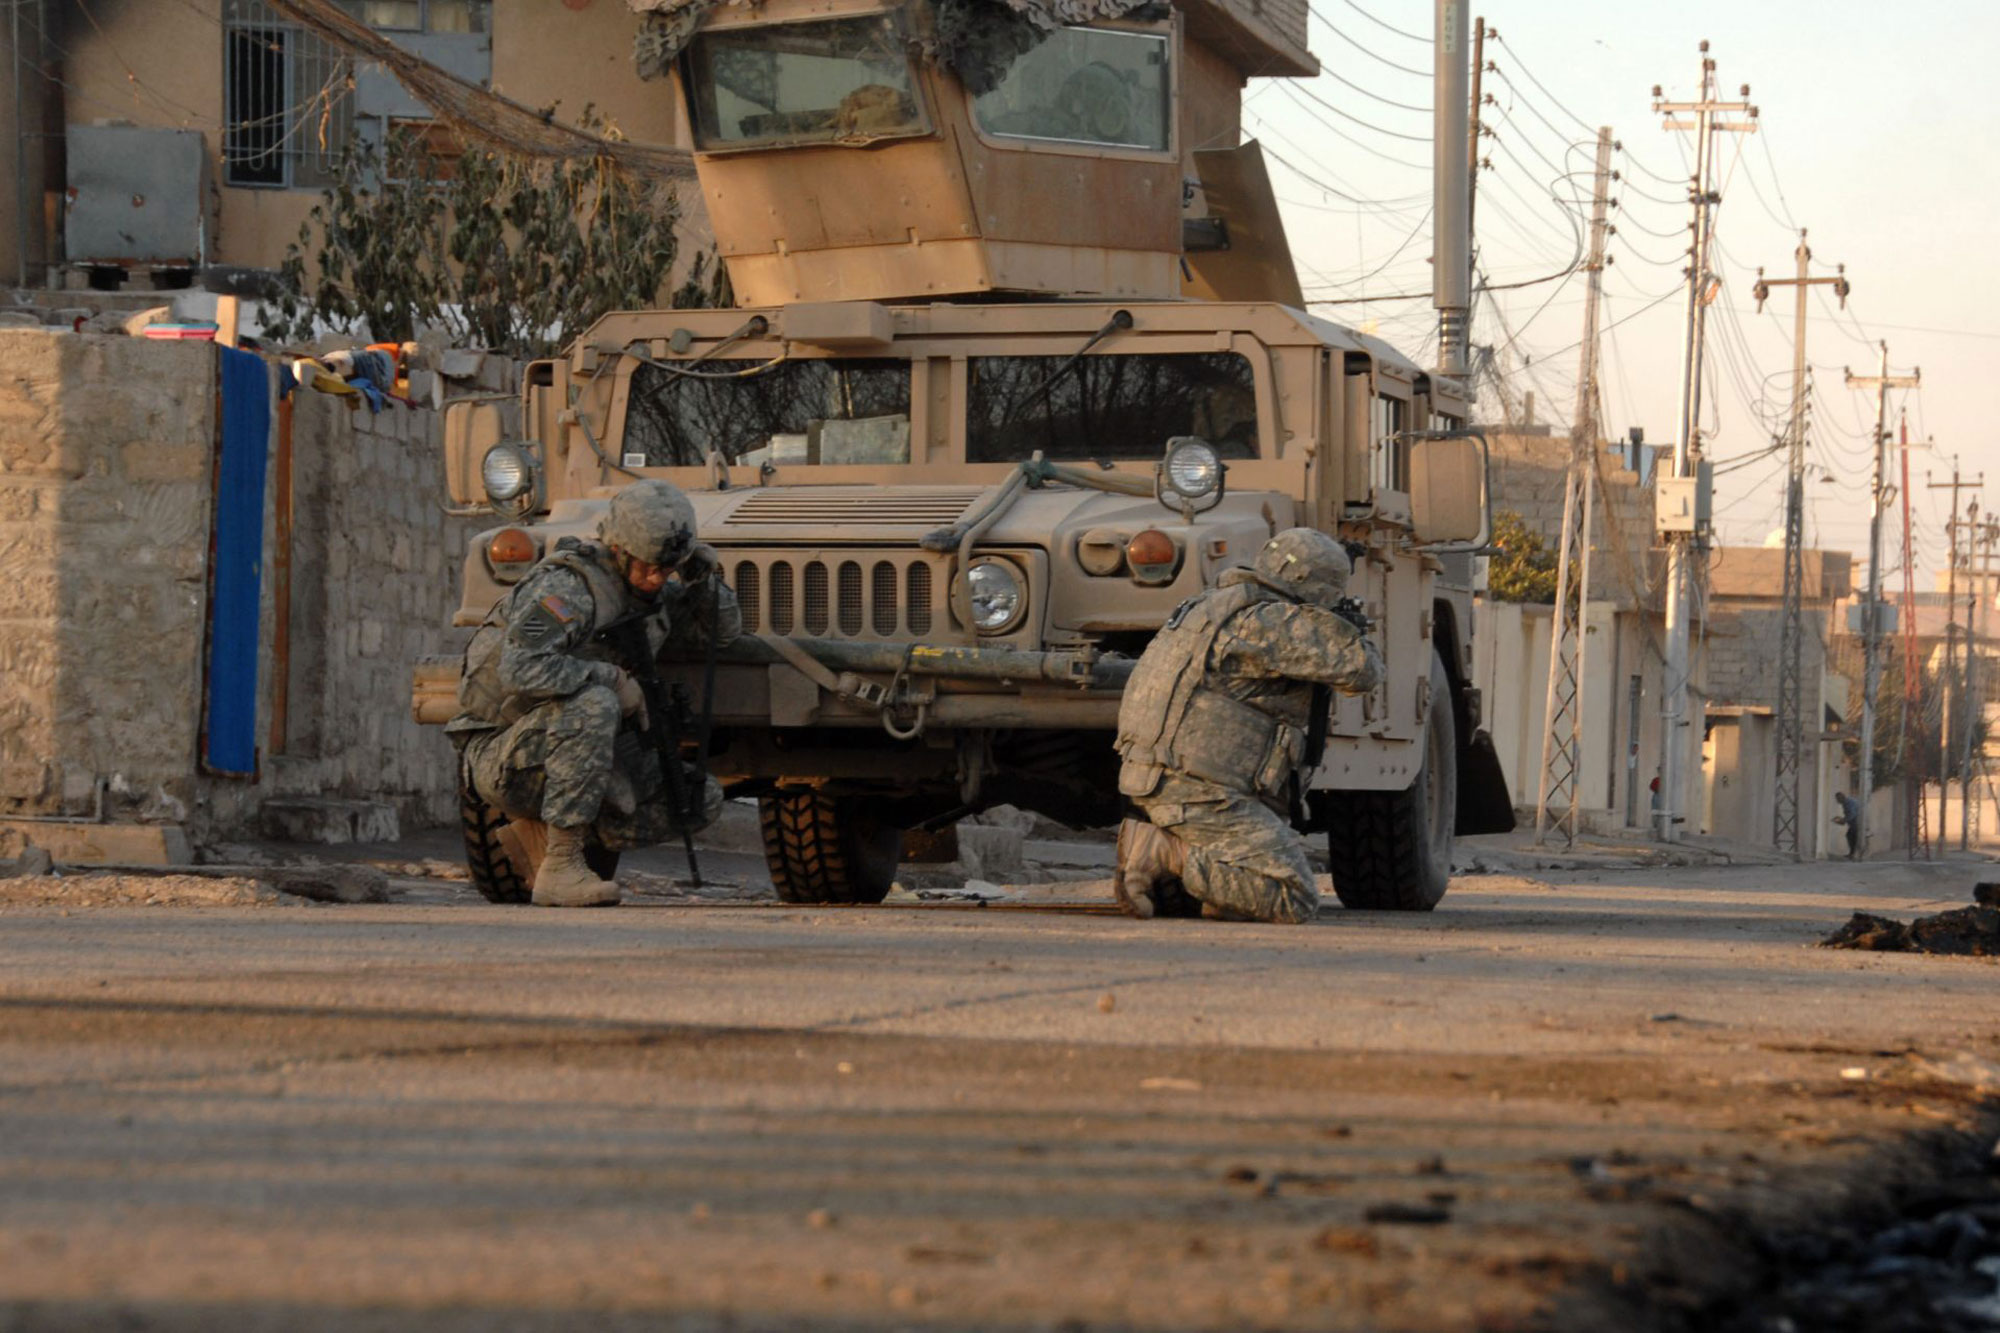 U.S. Army Soldiers, Heavy Company, 3rd Squadron, 3rd Armored Cavalry Regiment, take cover as they hear small arms fire open up in the distance in Mosul, Iraq, on Jan. 17, 2008.